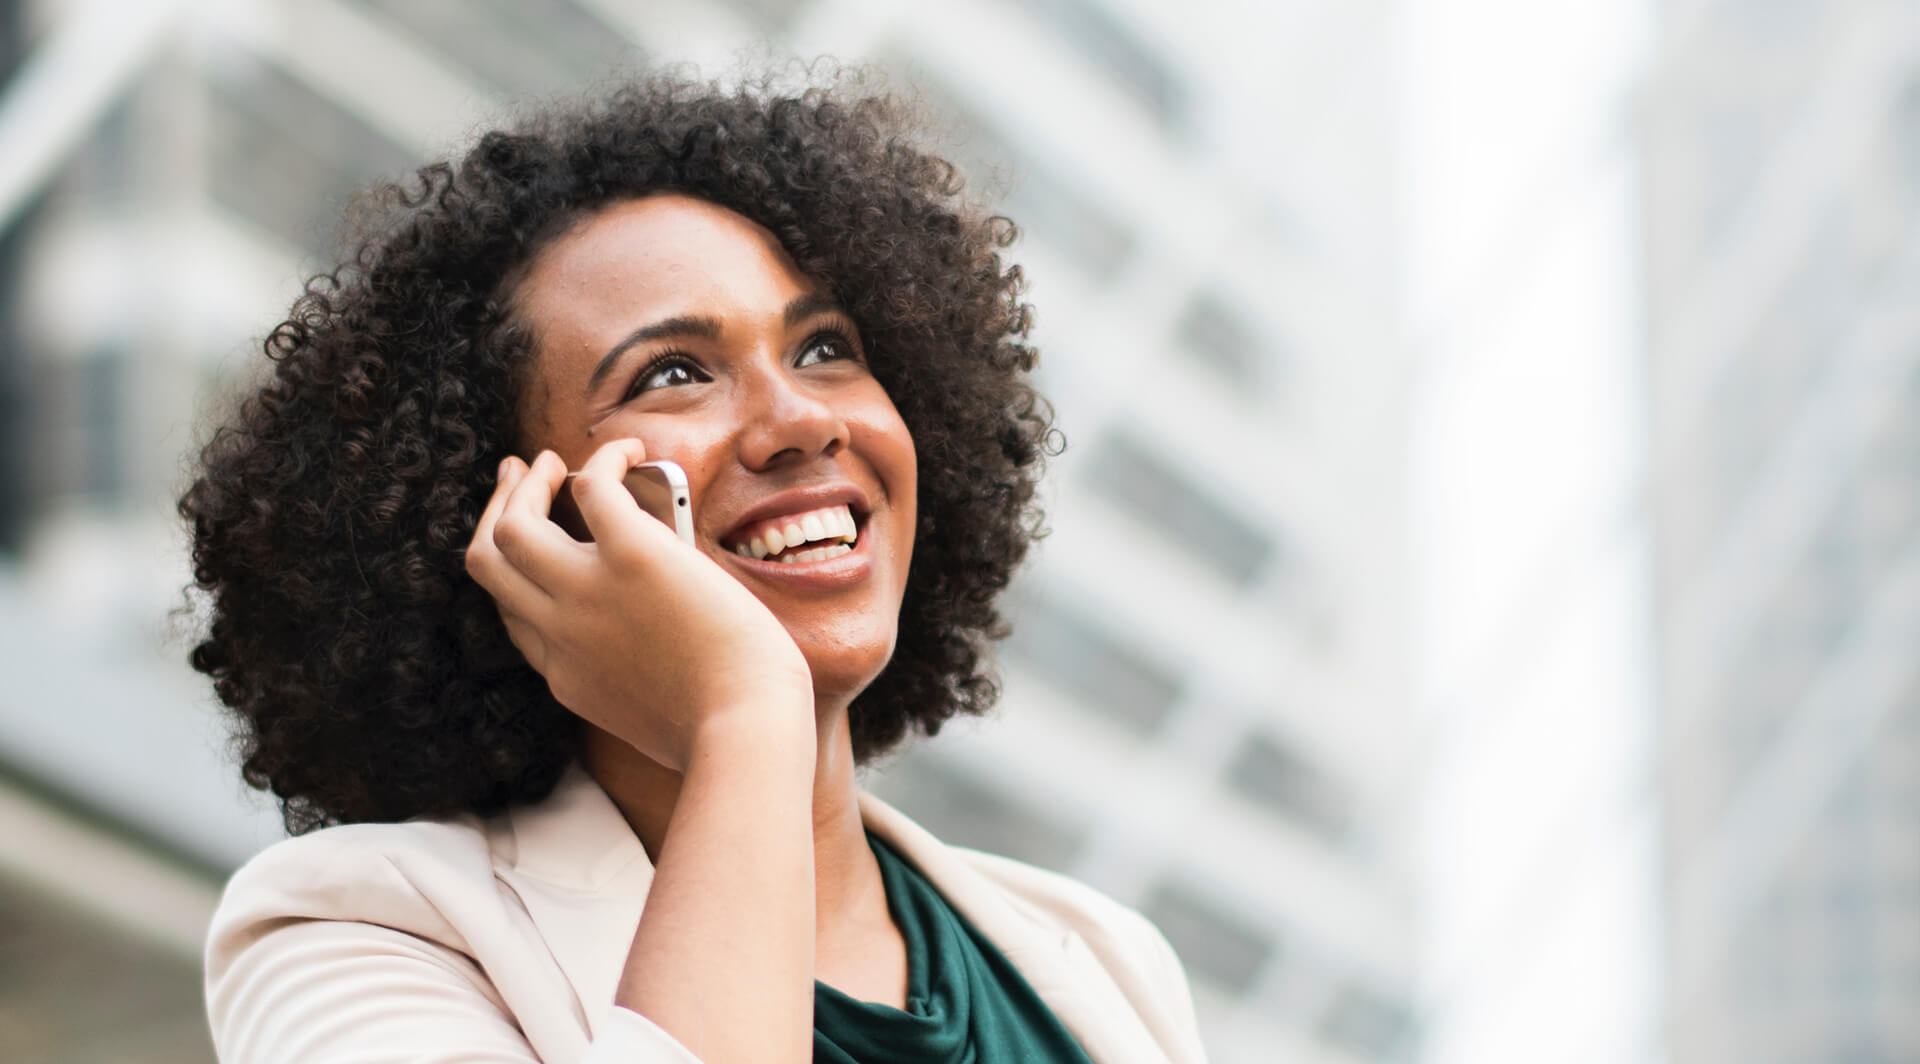 Businesswoman smiling and talking on a cell phone